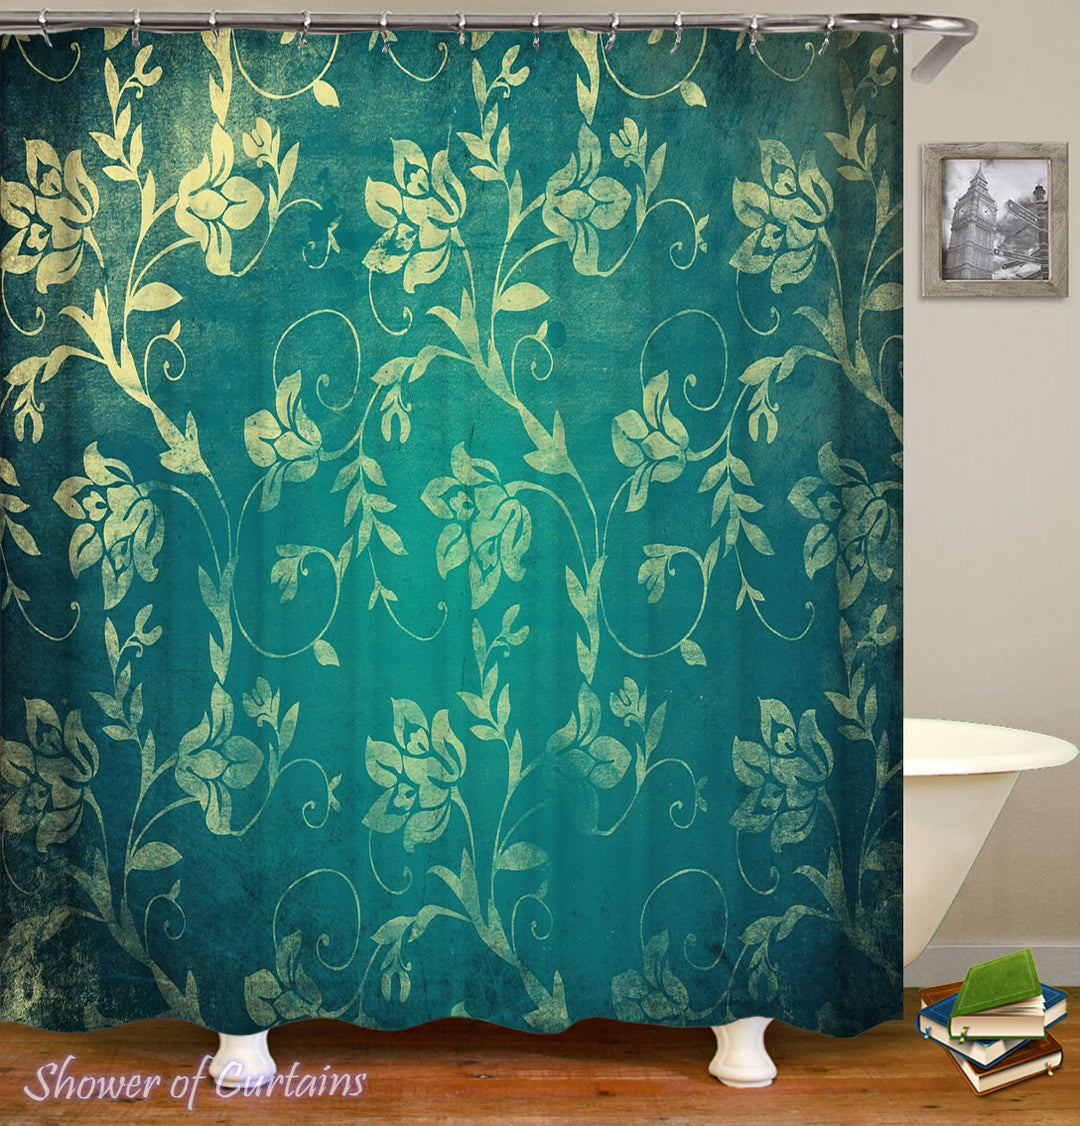 Yellow Flowers Over The Turquoise Shower Curtain